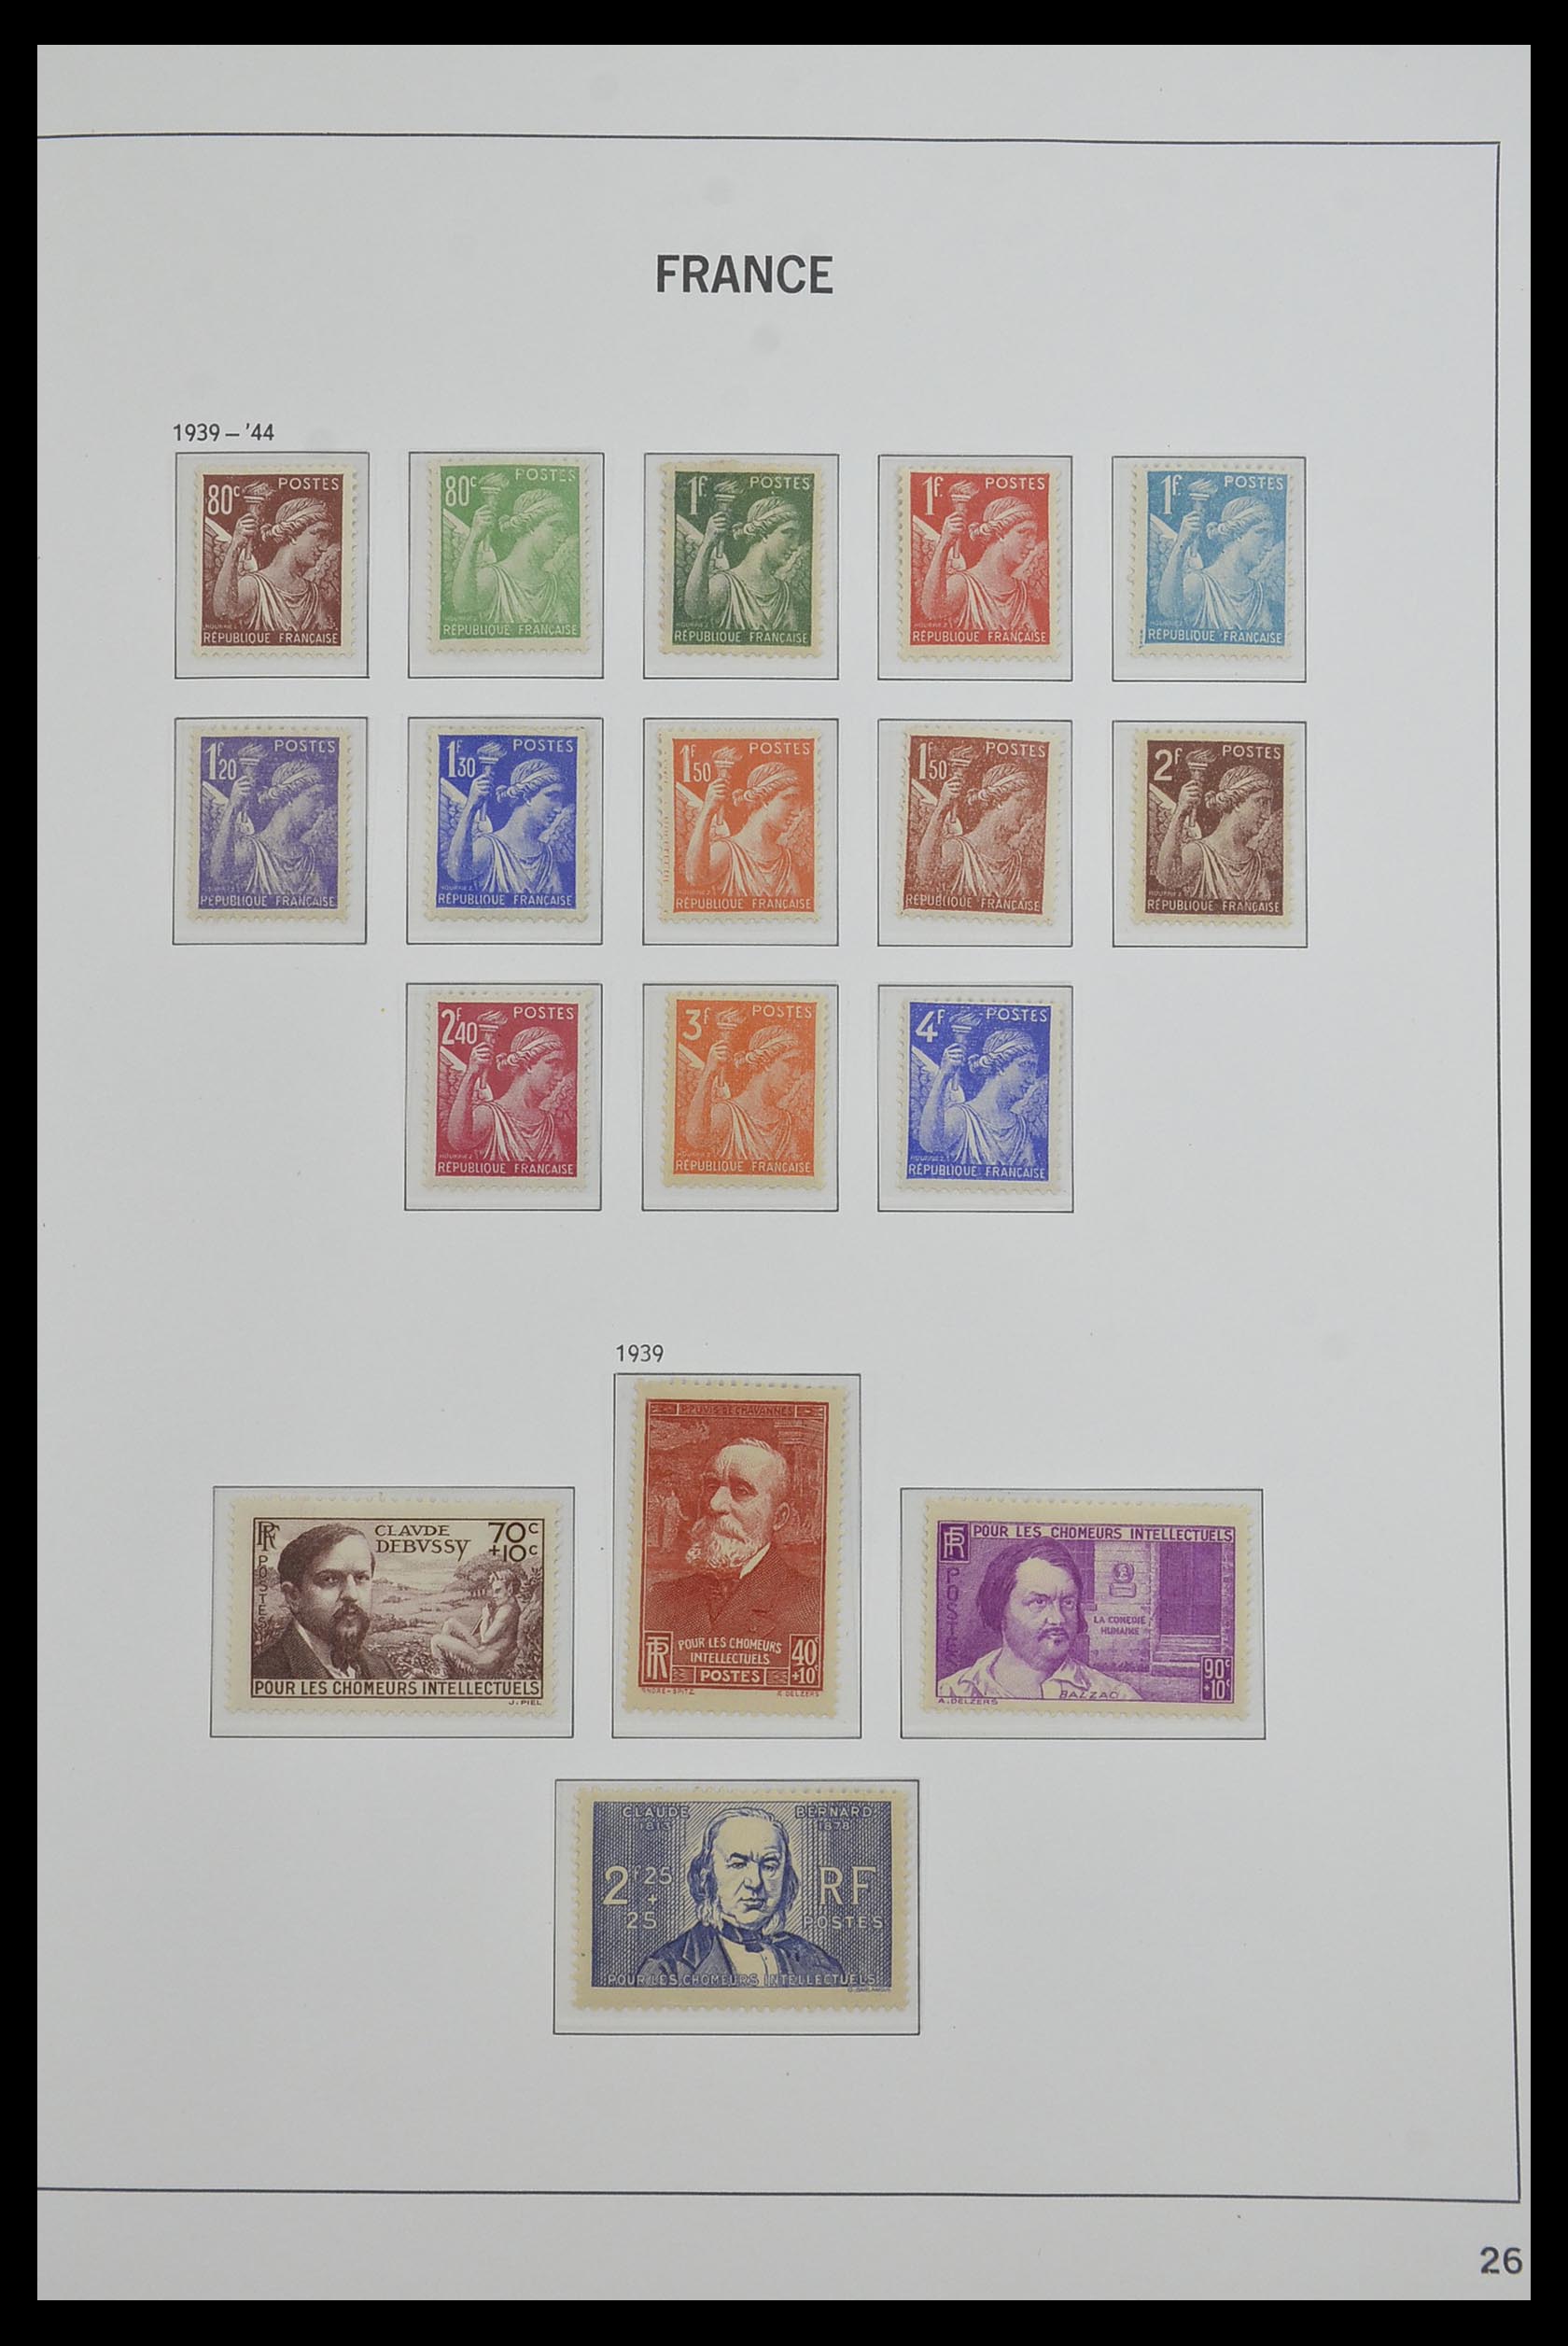 33480 026 - Stamp collection 33480 France 1849-1993.